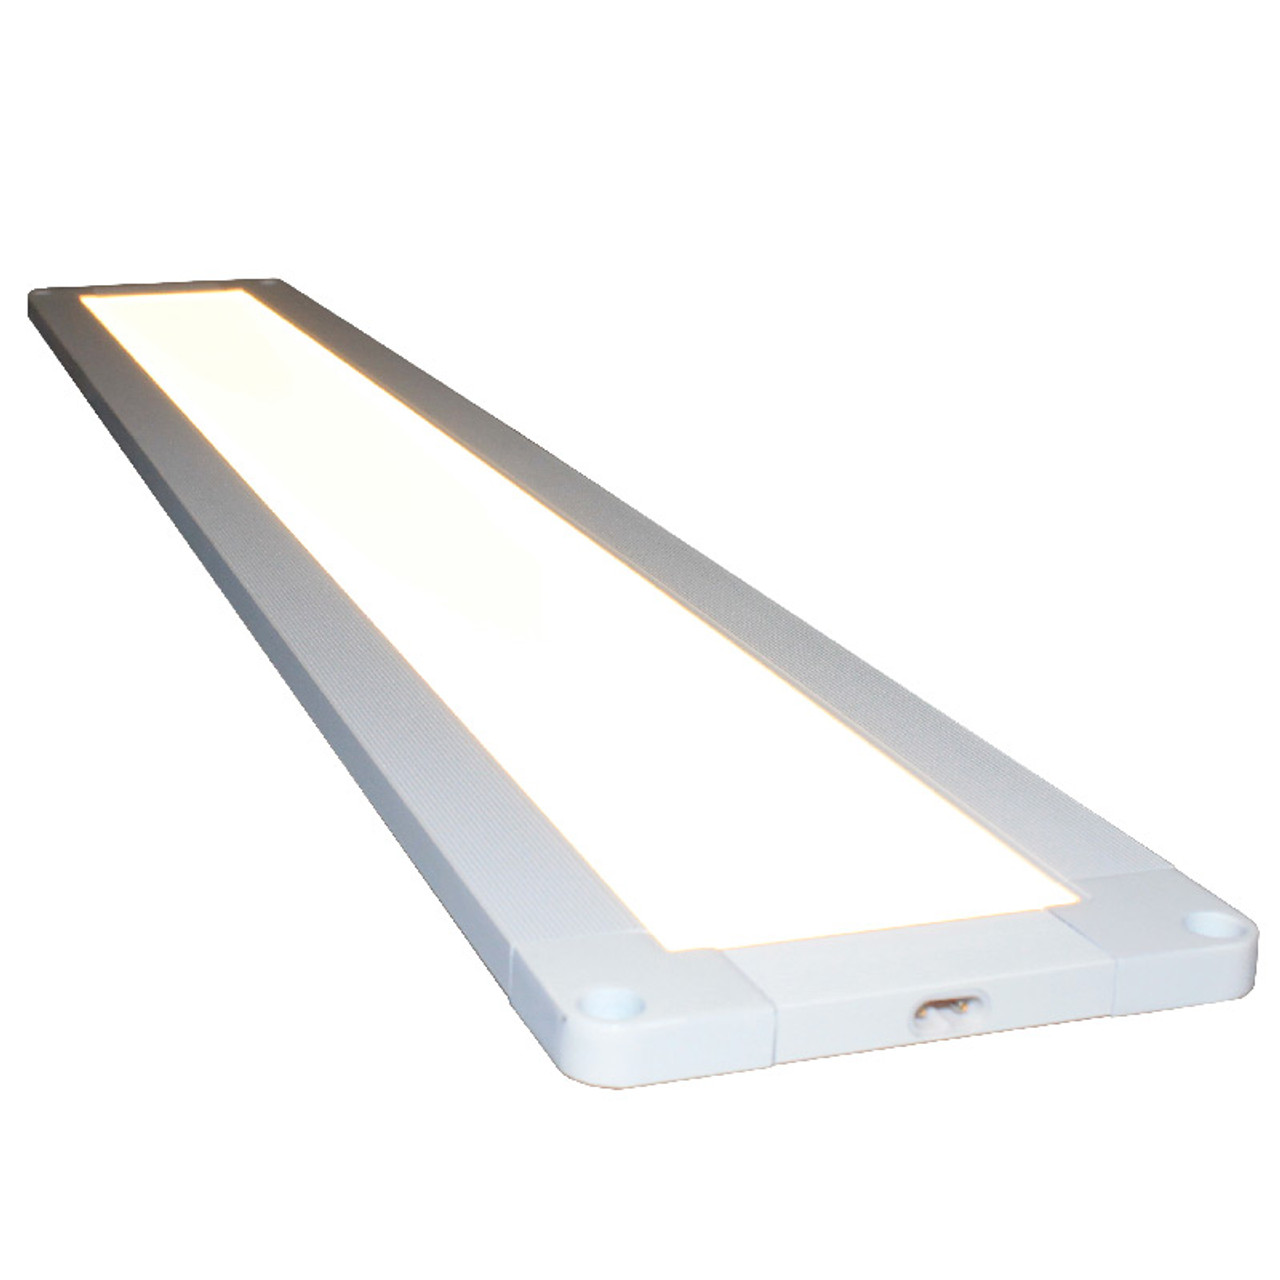 Dimmable White LED Kitchen Light Fixture | AQLighting